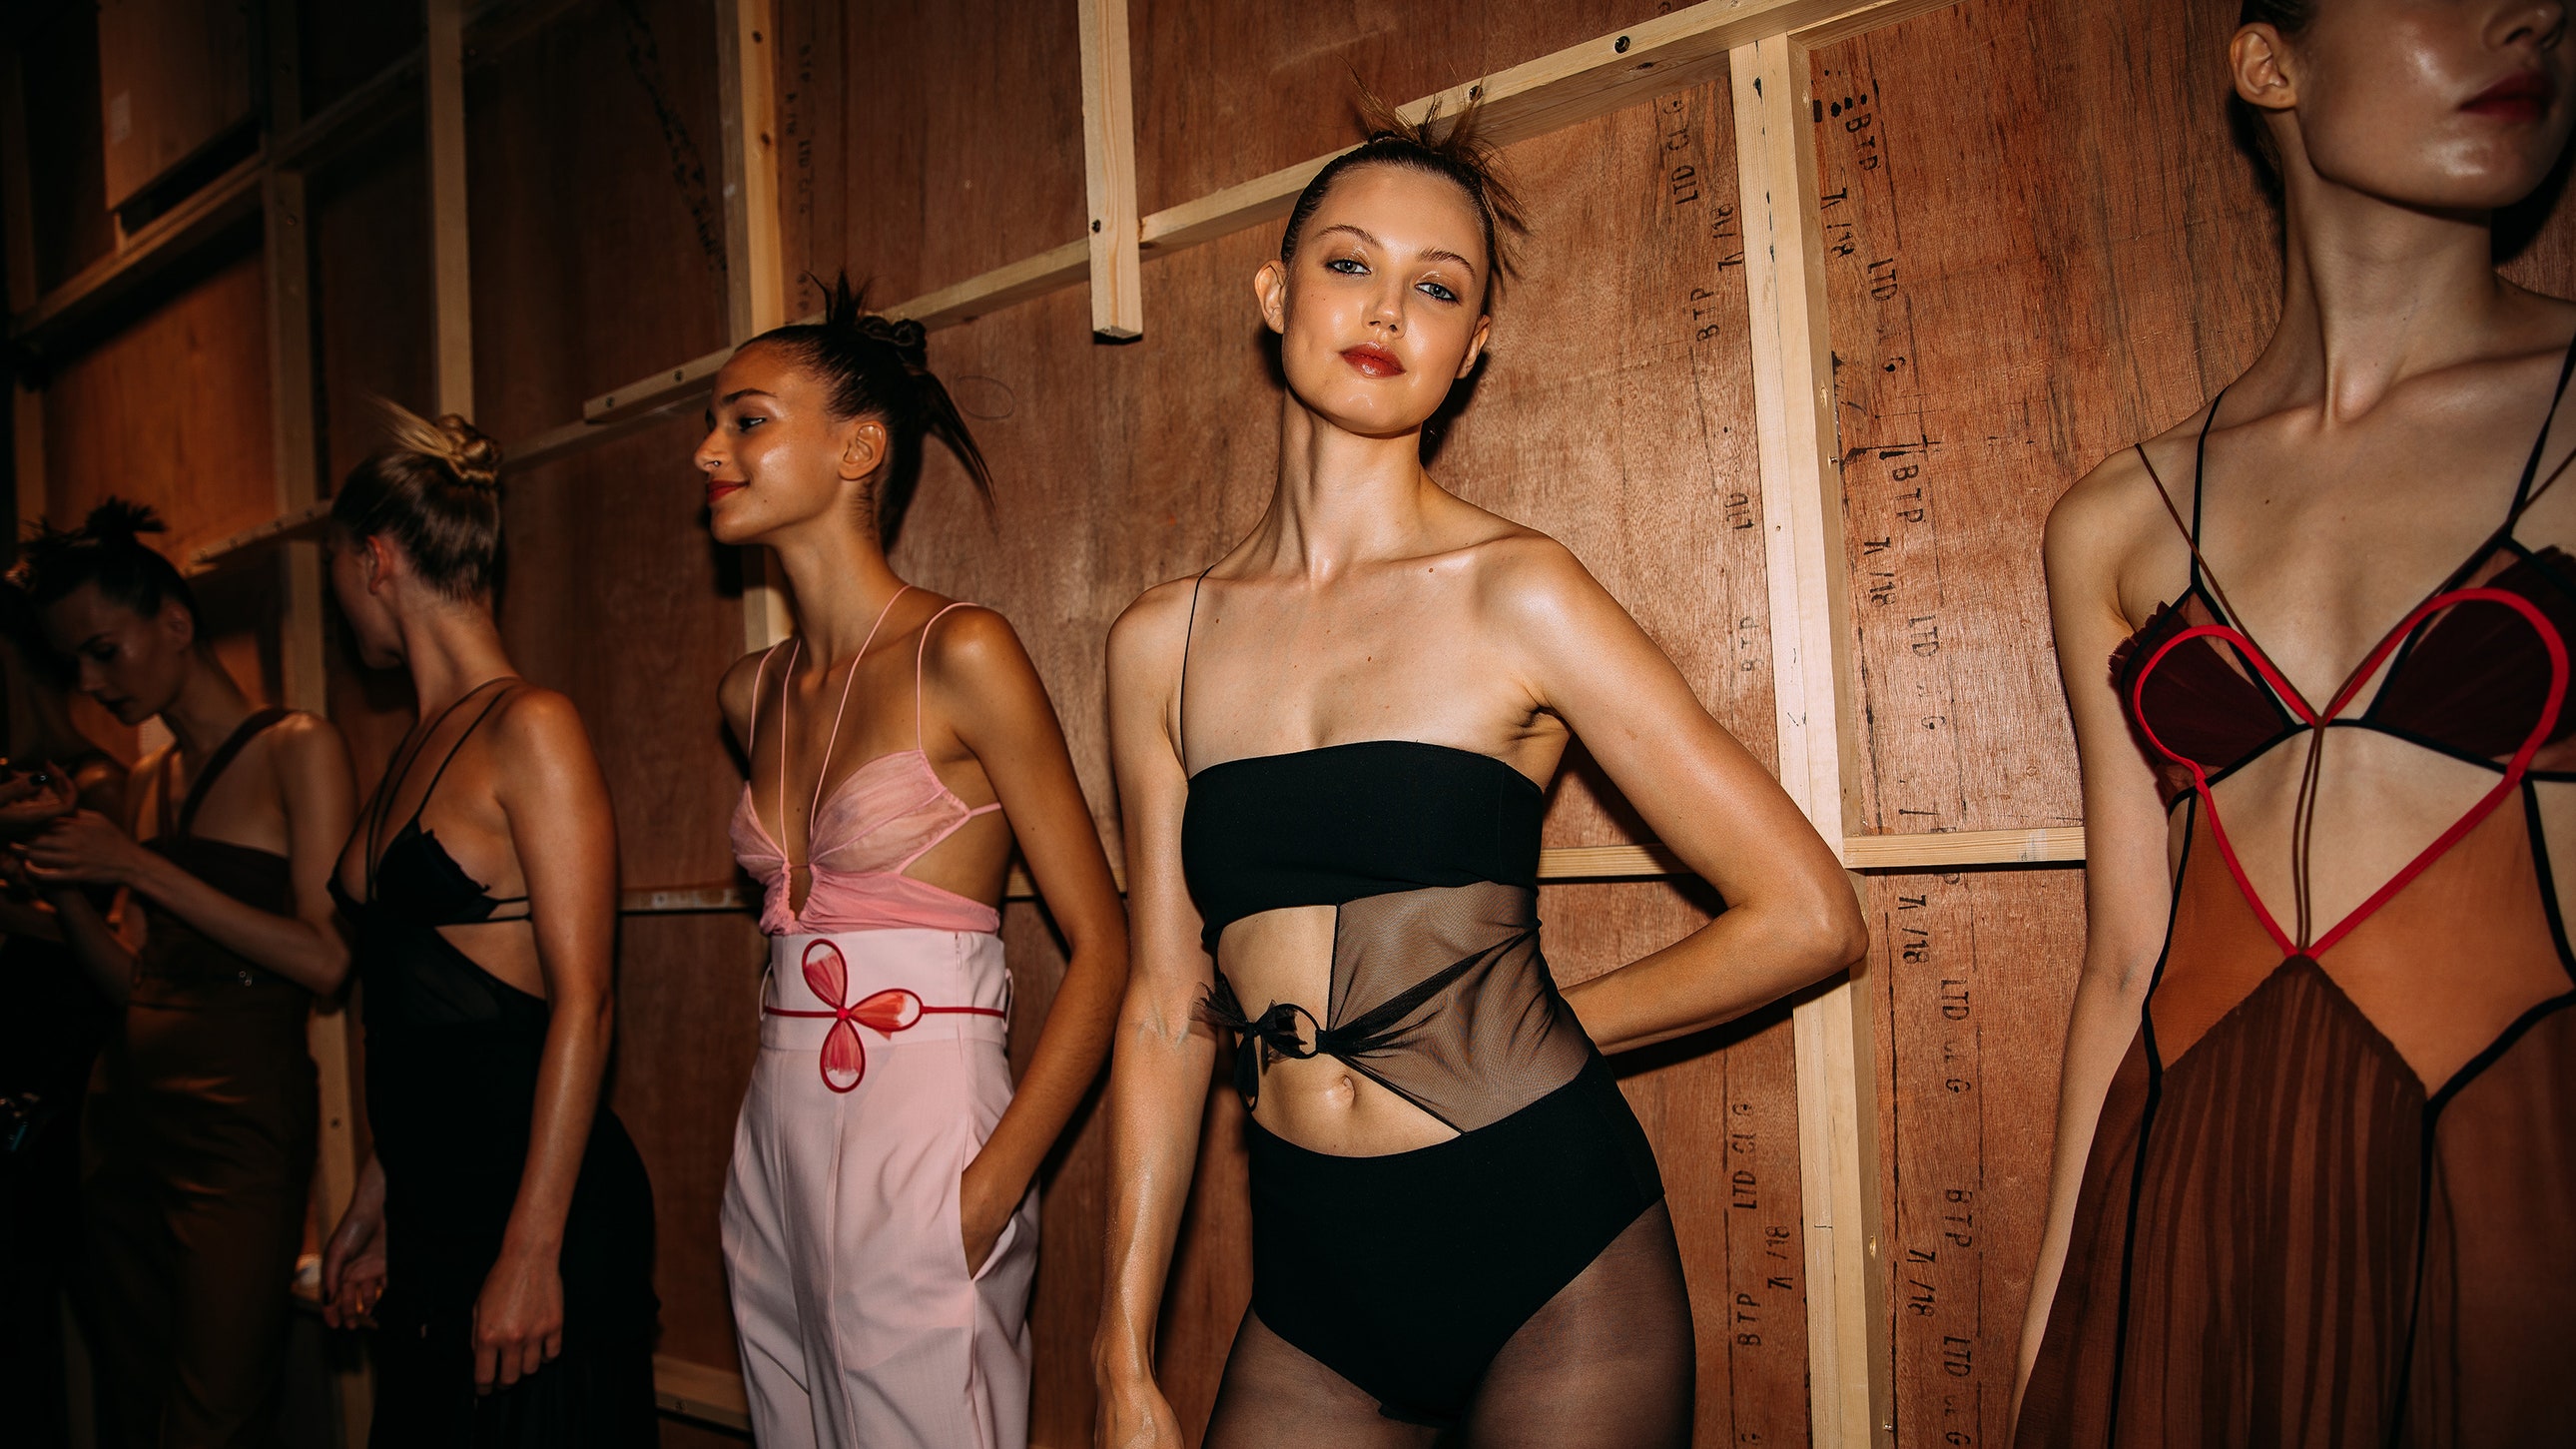 The Best Behind-the-Scenes Photos From London Fashion Week’s Spring 2022 Shows